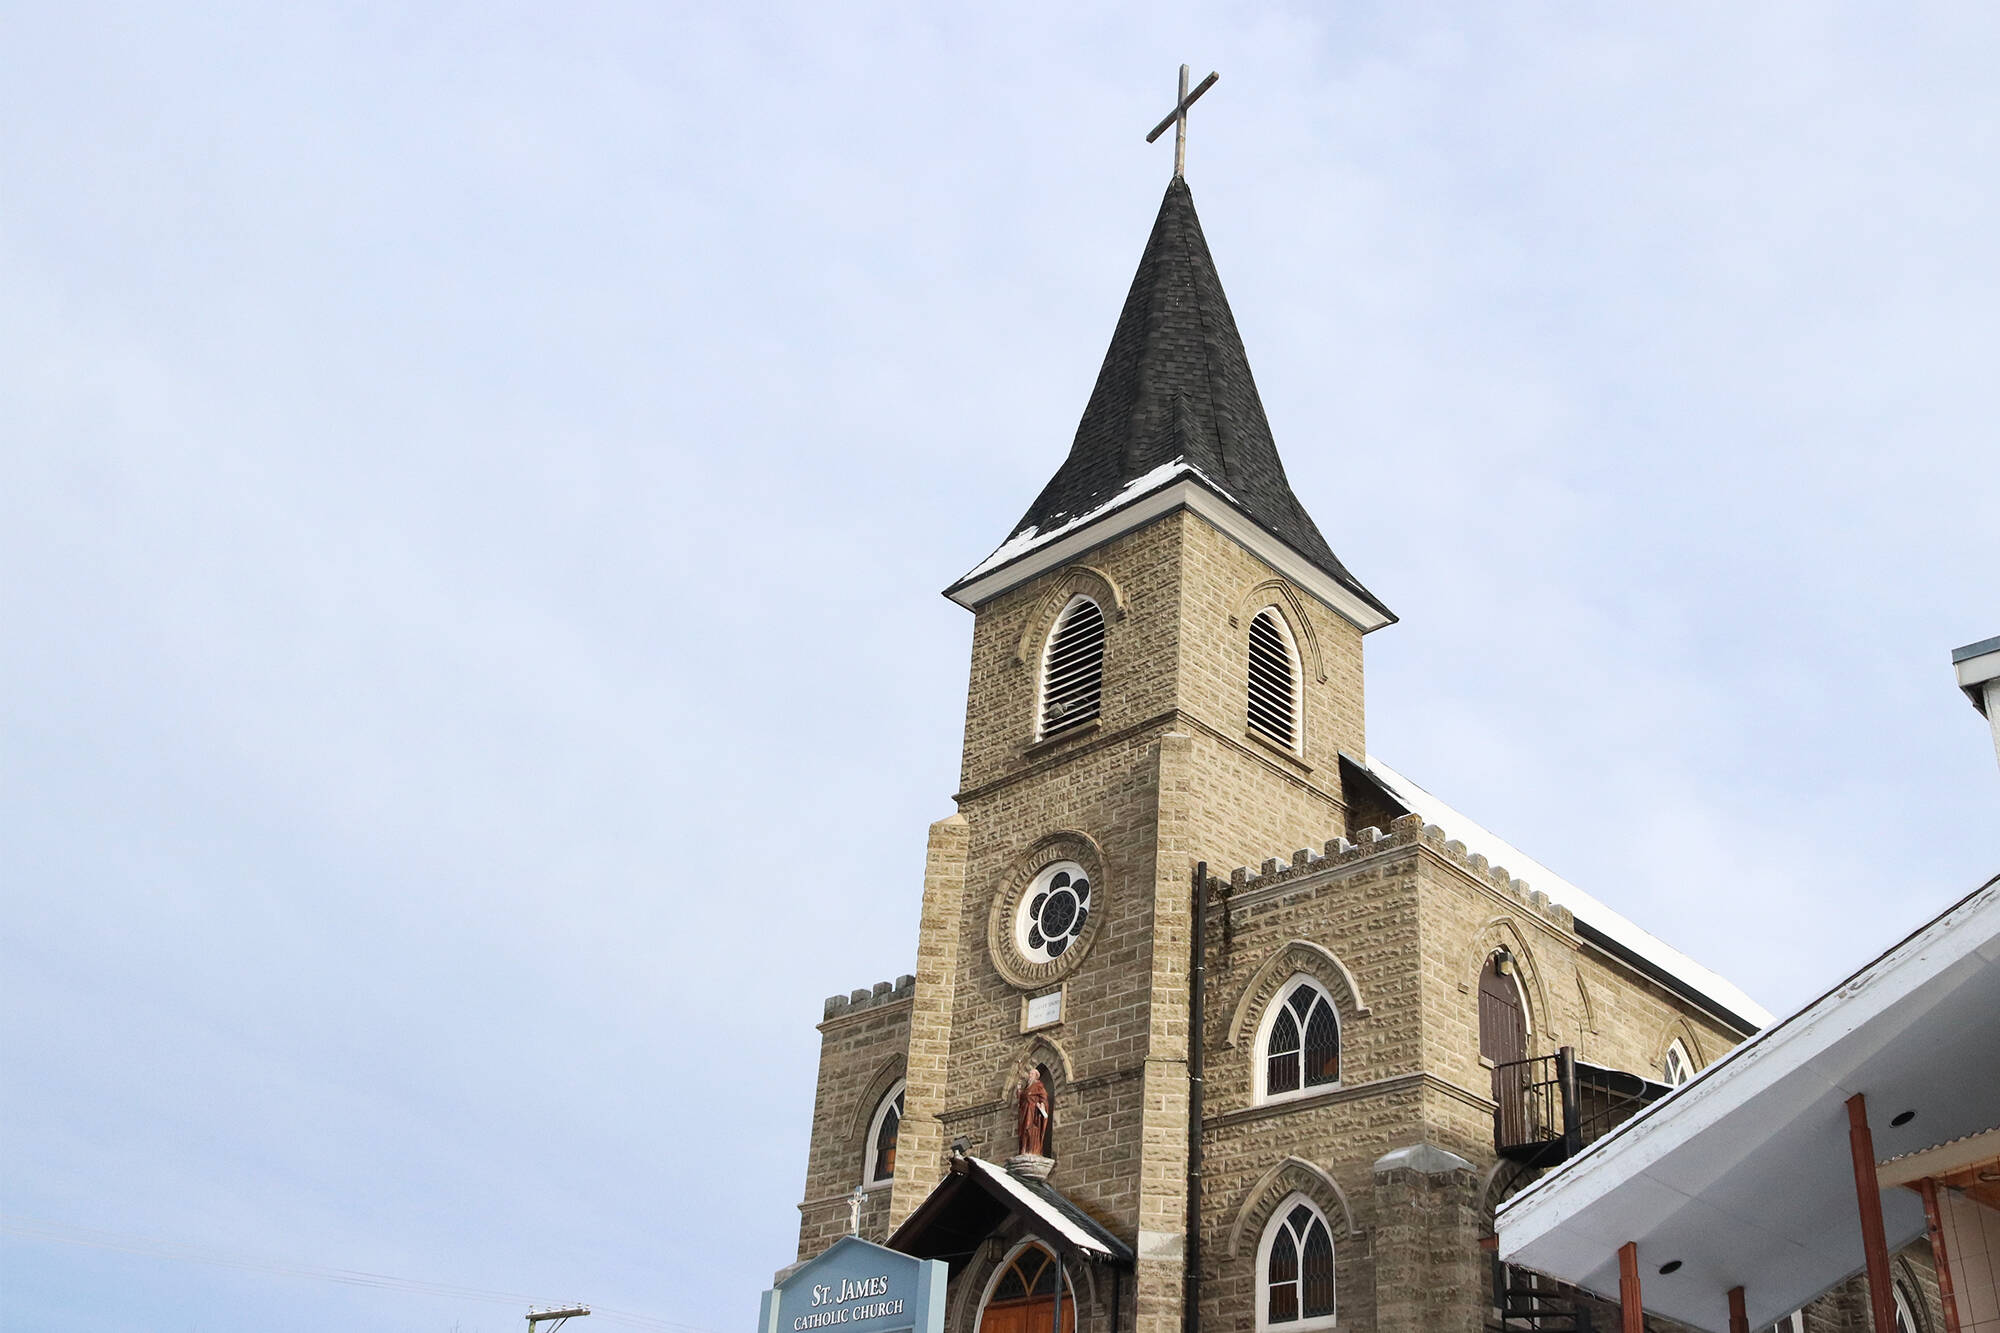 A woman has sued the Catholic Church alleging she was sexually assaulted by a priest at an elementary school run by the St. James Catholic Church in Vernon in 1970. The statement of claim was filed in B.C. Supreme Court Feb. 22, 2022. (Brendan Shykora - Morning Star)